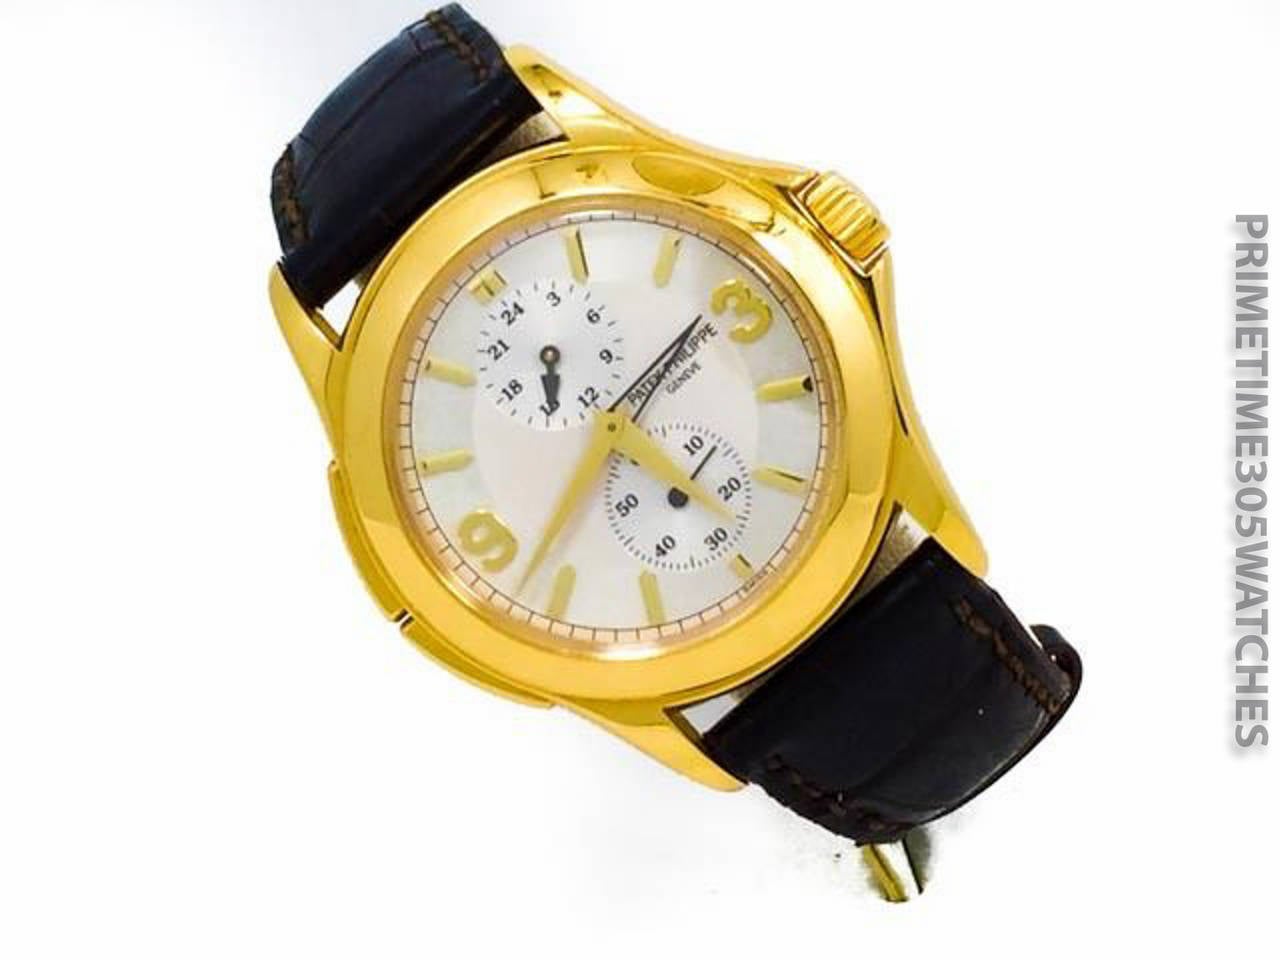 Men's Patek Philippe Travel Time In 18k Yellow Gold w/ Deployment Buckle, Ref 5134J. Watch is Operated by Mechanical Hand Winding. The Watch is In Excellent Condition W/ Some Some Minor Superficial Scratches. Included is a Patek Philippe Box.